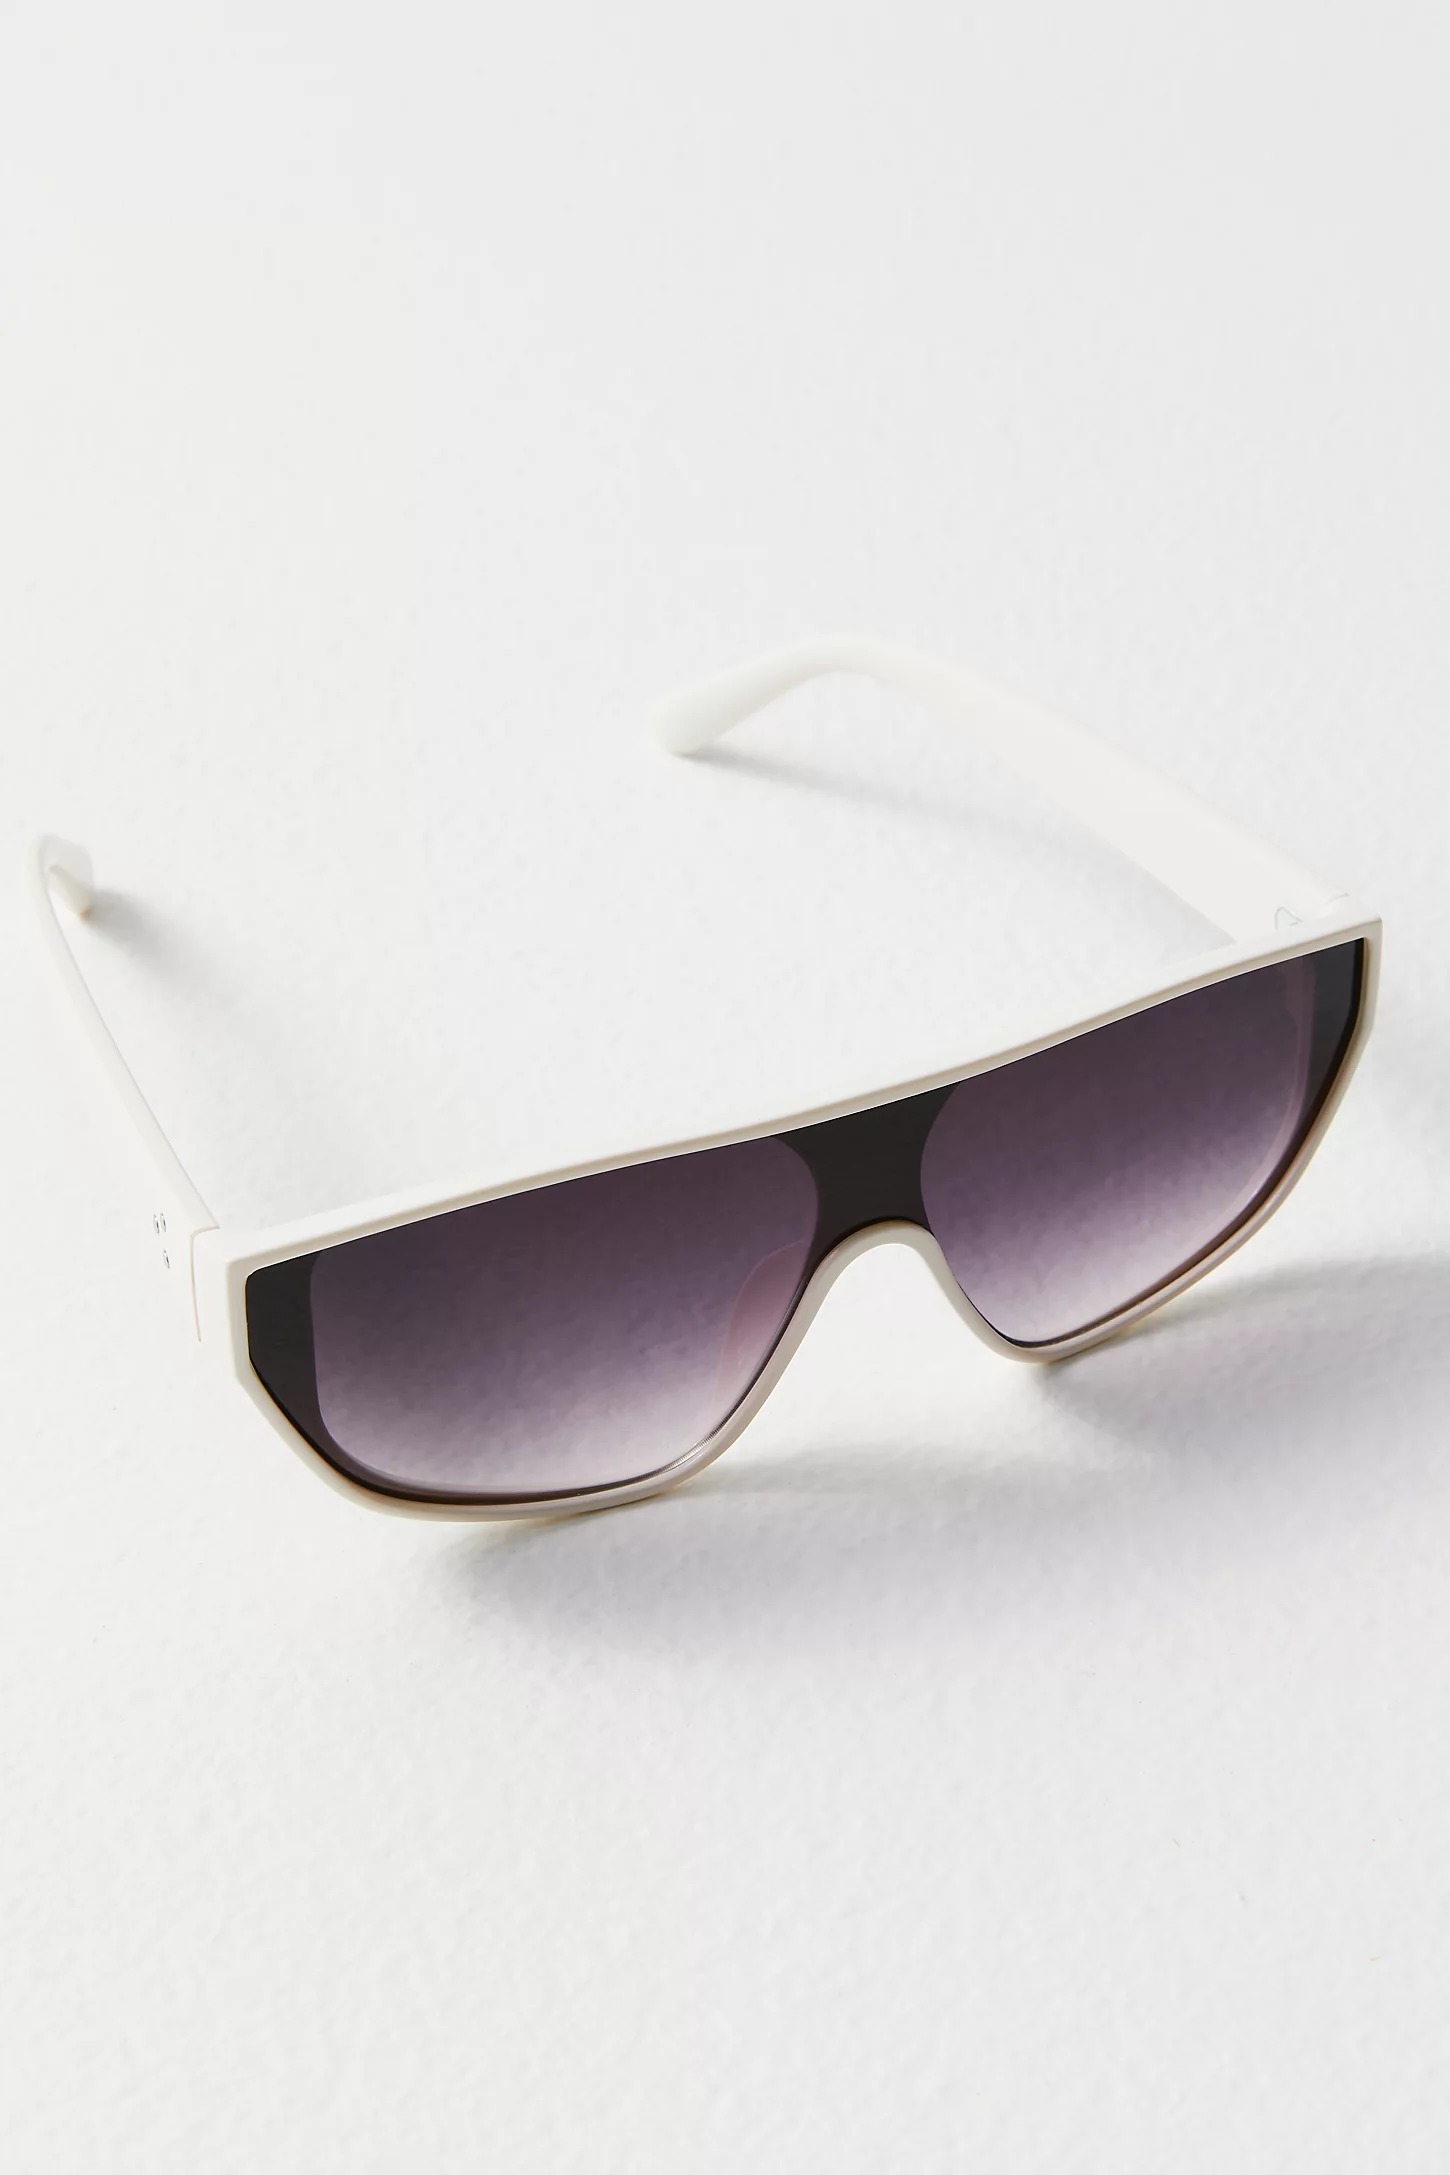 To The Races Shield-Sonnenbrille von Free People (25 $)